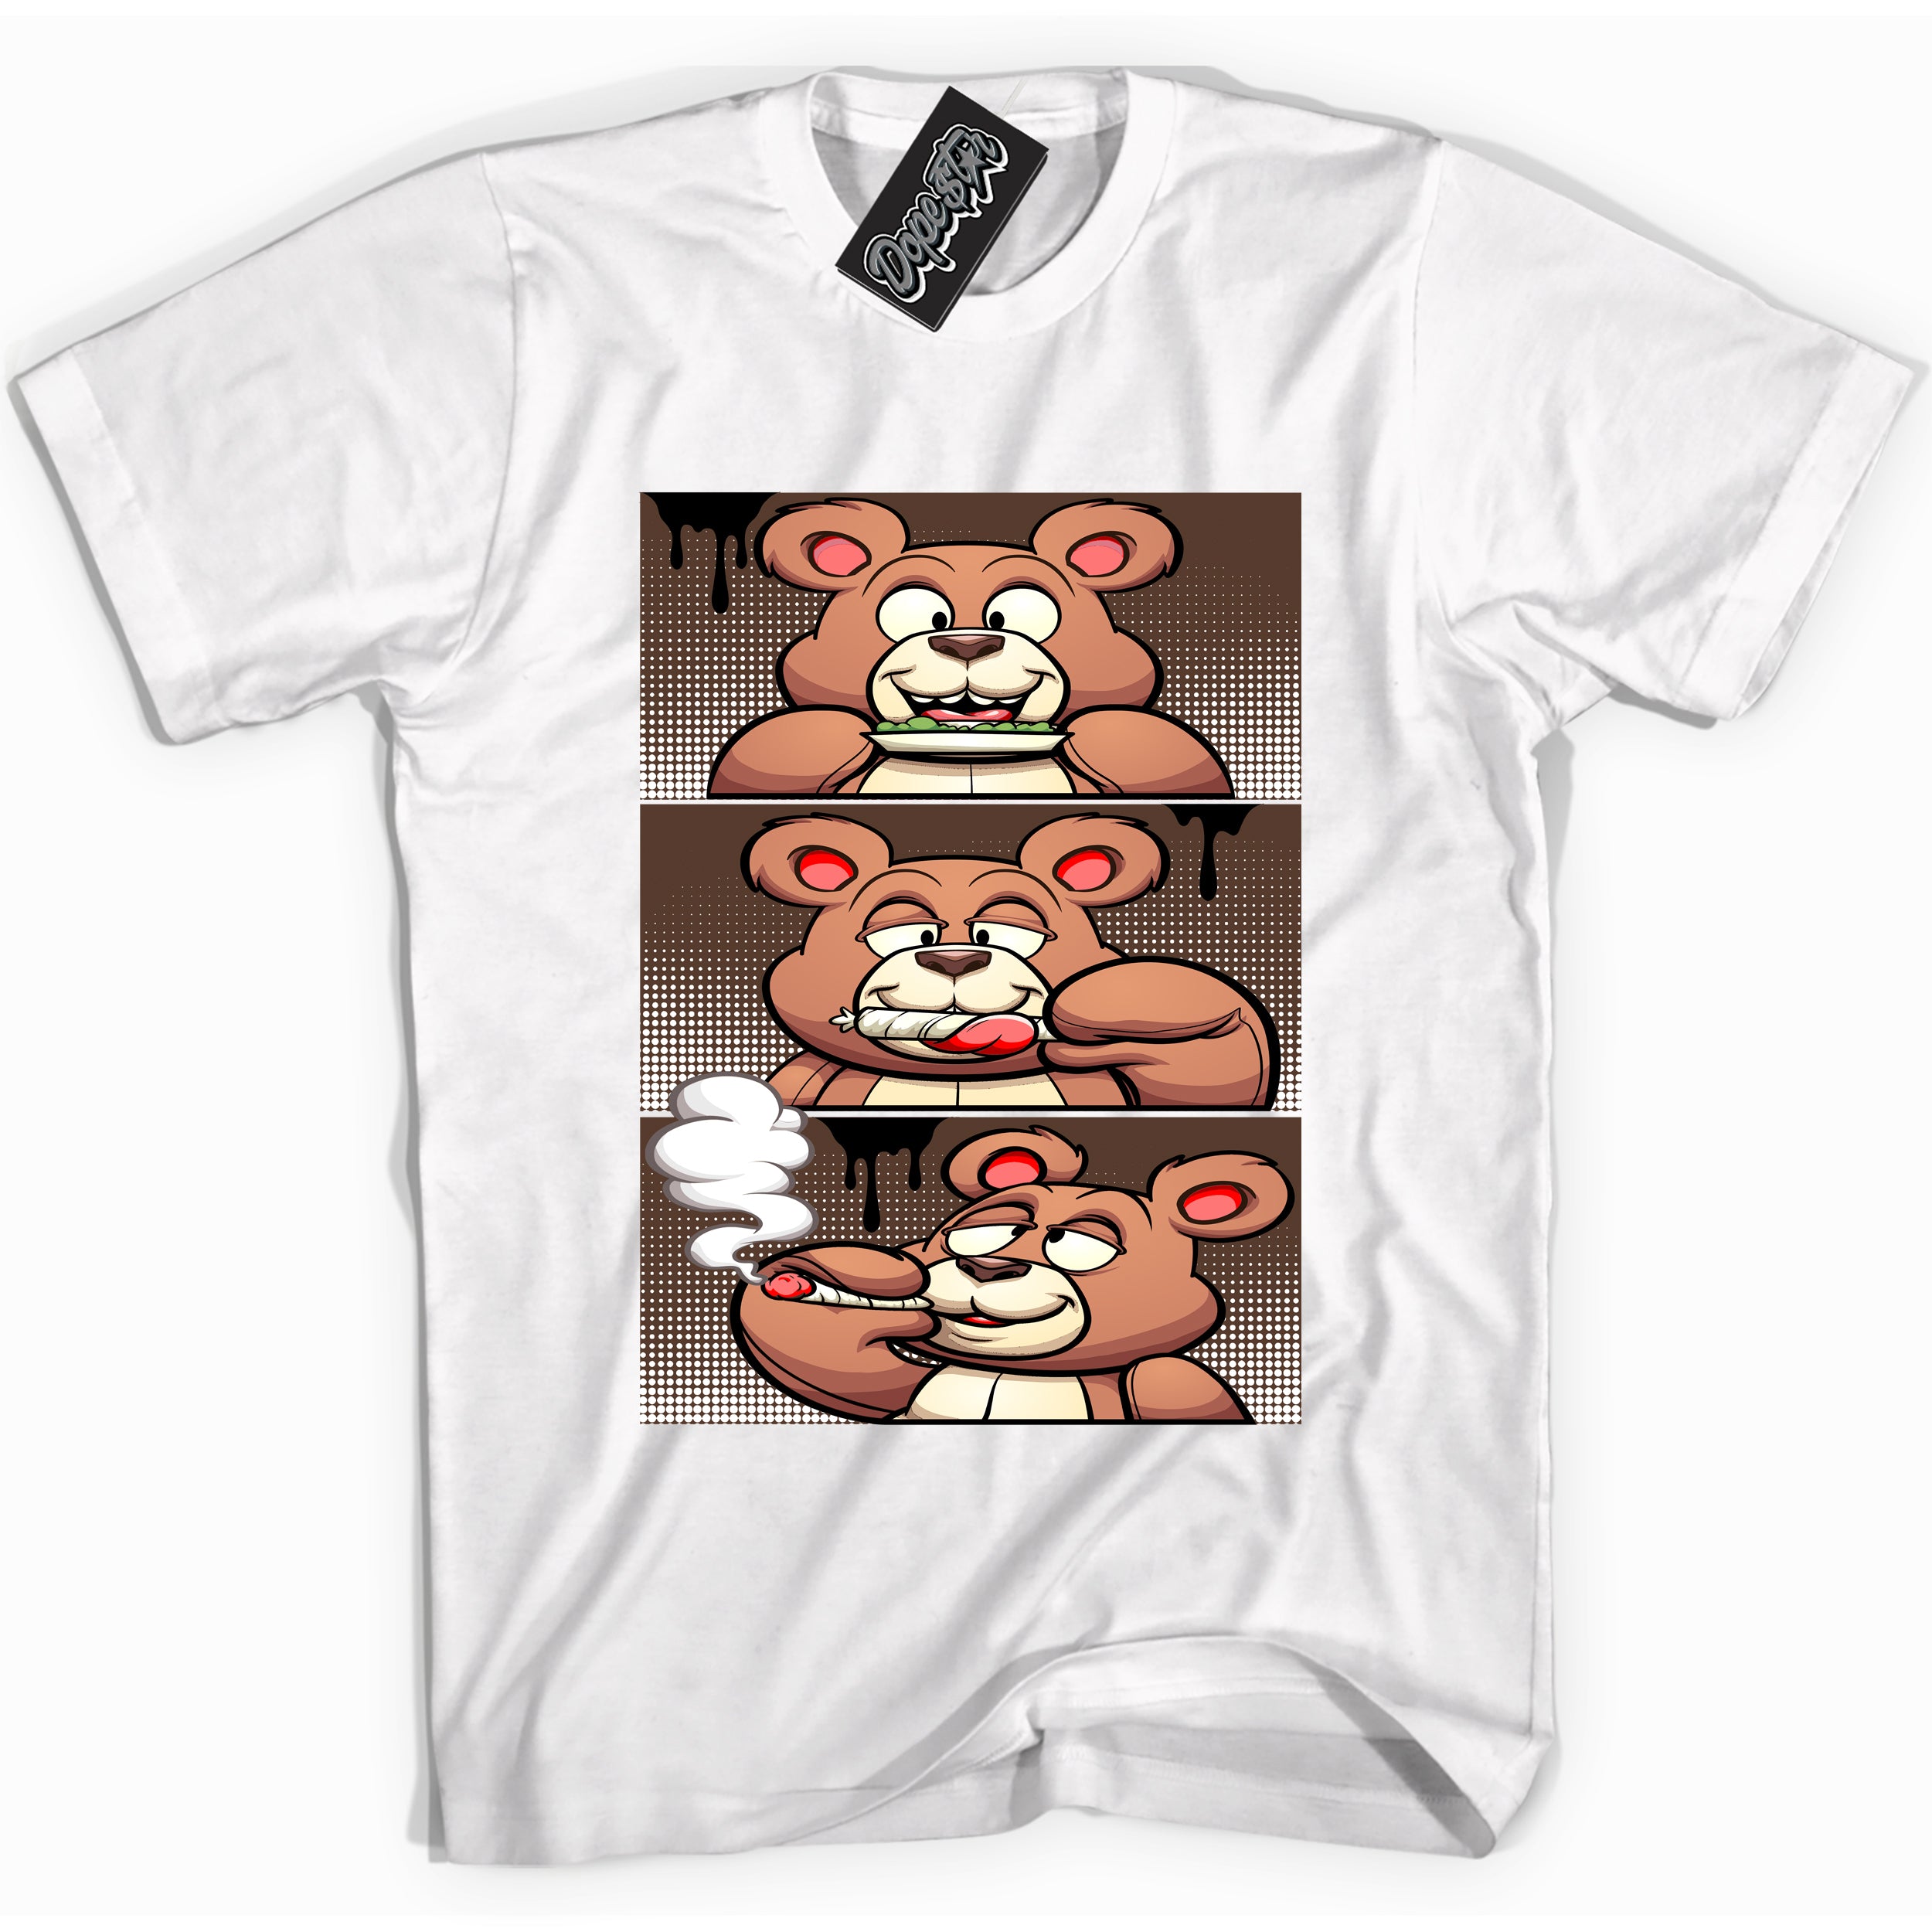 Cool White graphic tee with “ Roll It Lick It Smoke It Bear ” design, that perfectly matches Palomino 1s sneakers 